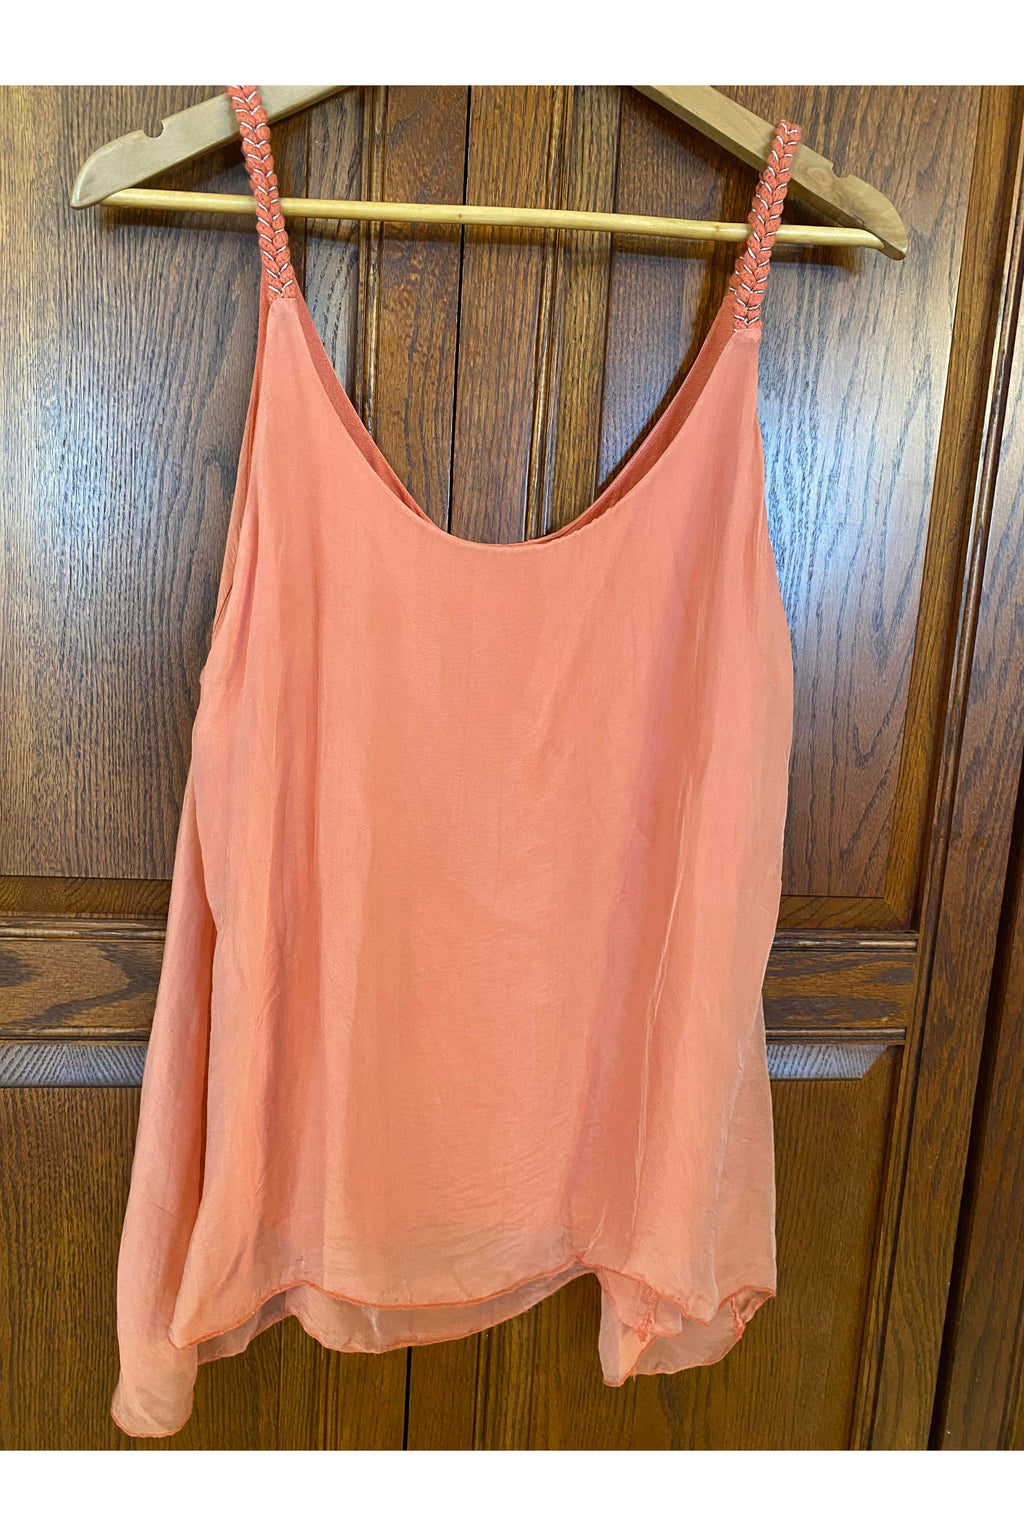 Scandal Italy - "Pearl" - Silky Tank with Braided Straps - in PEACH